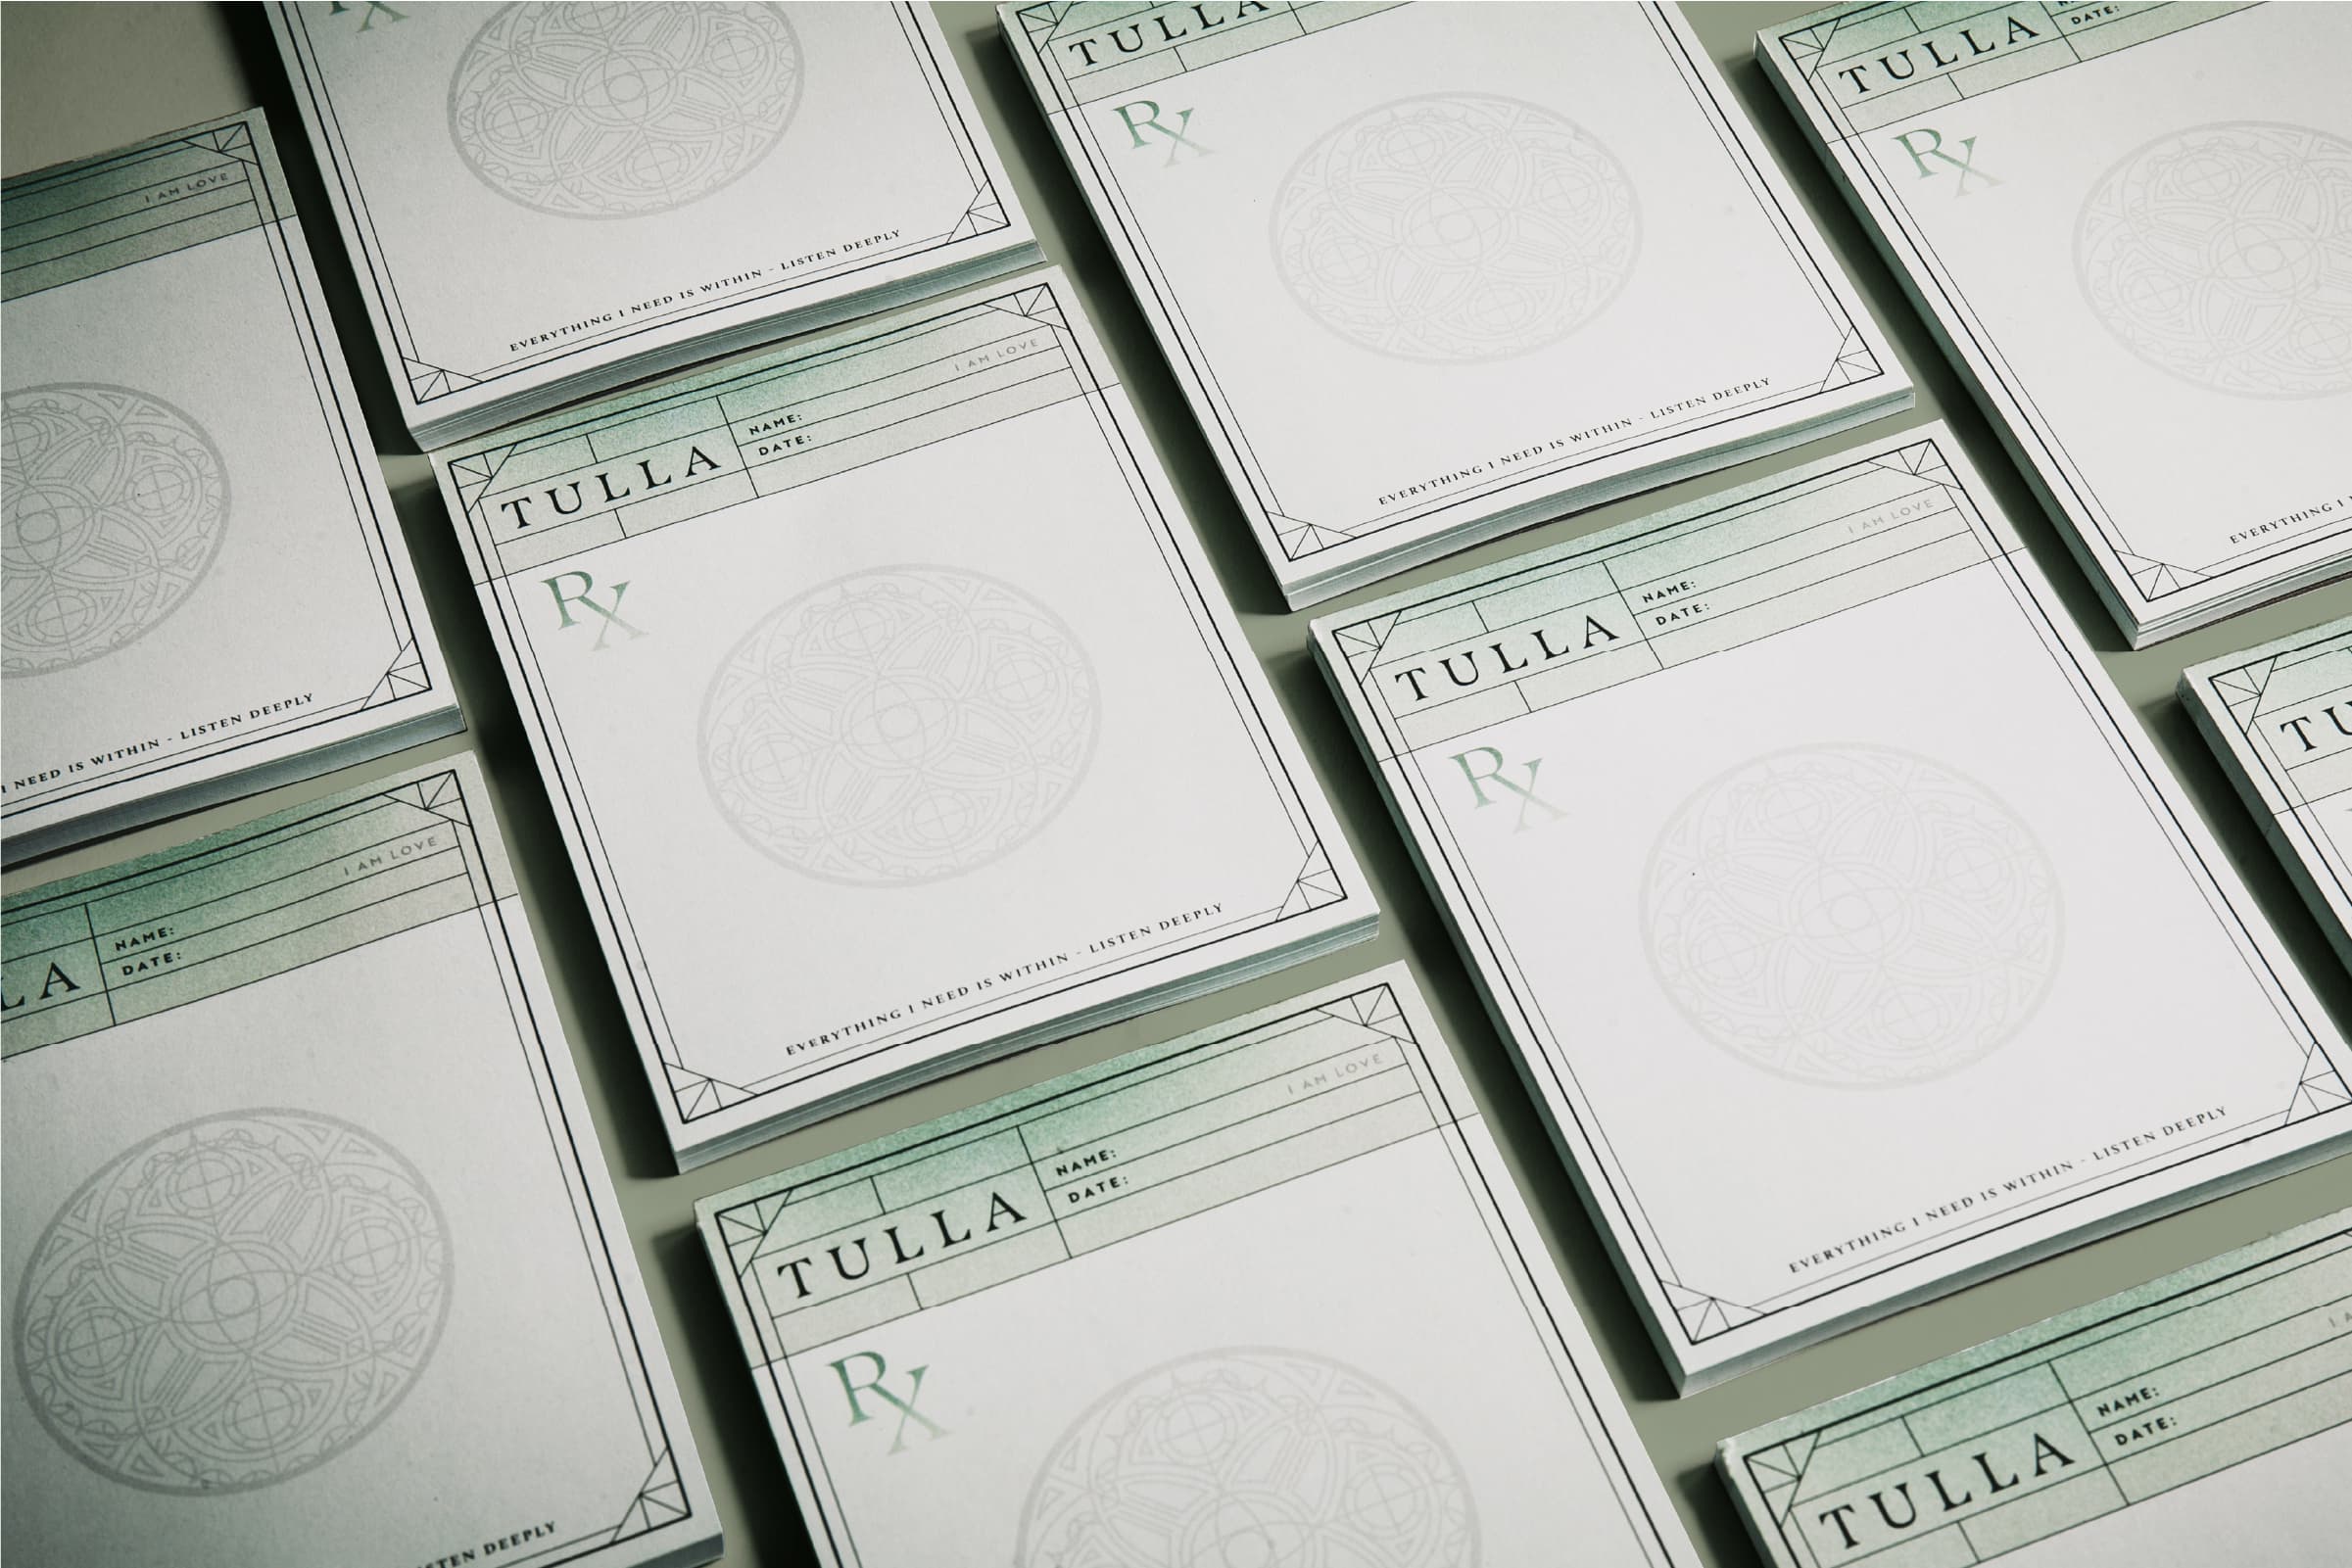 tulla design printed collateral RX pads